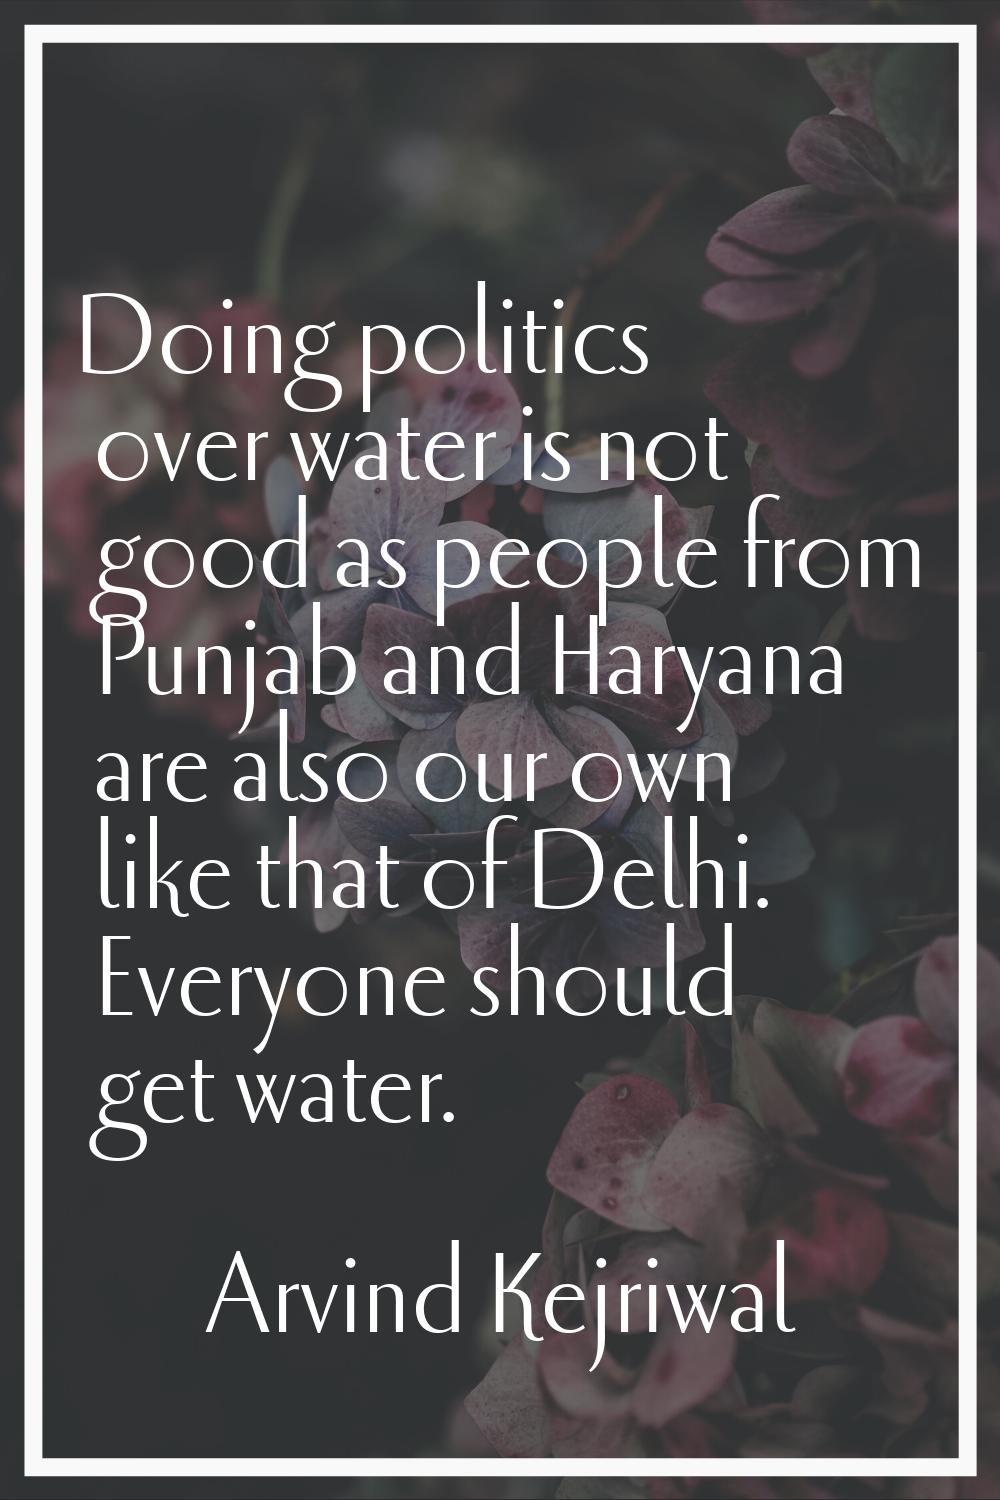 Doing politics over water is not good as people from Punjab and Haryana are also our own like that 